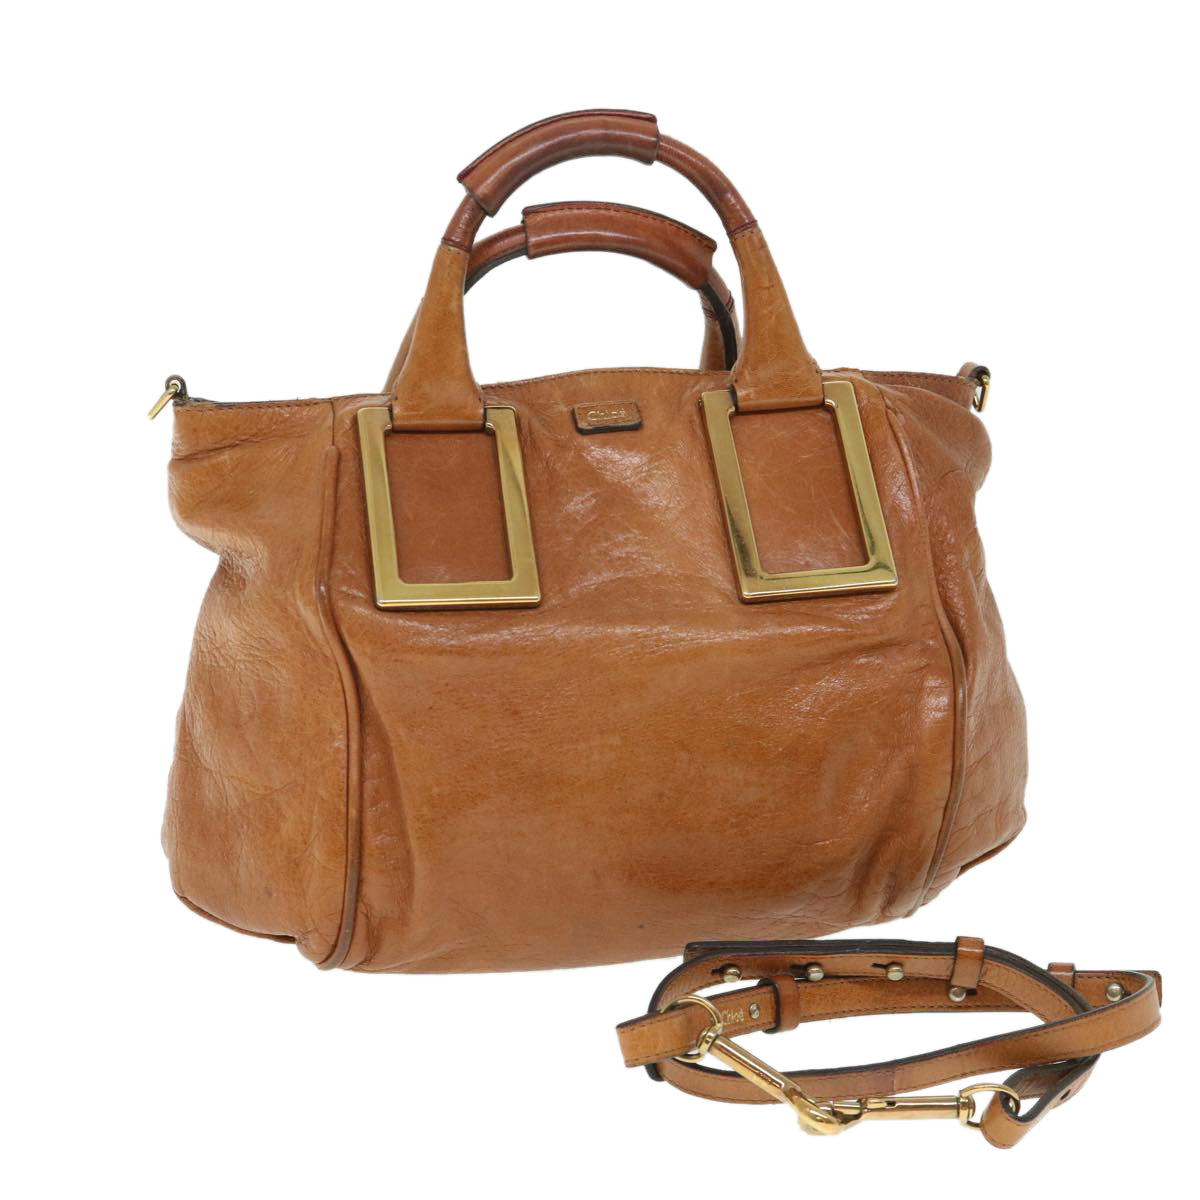 Chloe Etel Hand Bag Leather 2way Brown 03-10-50 Auth th4093